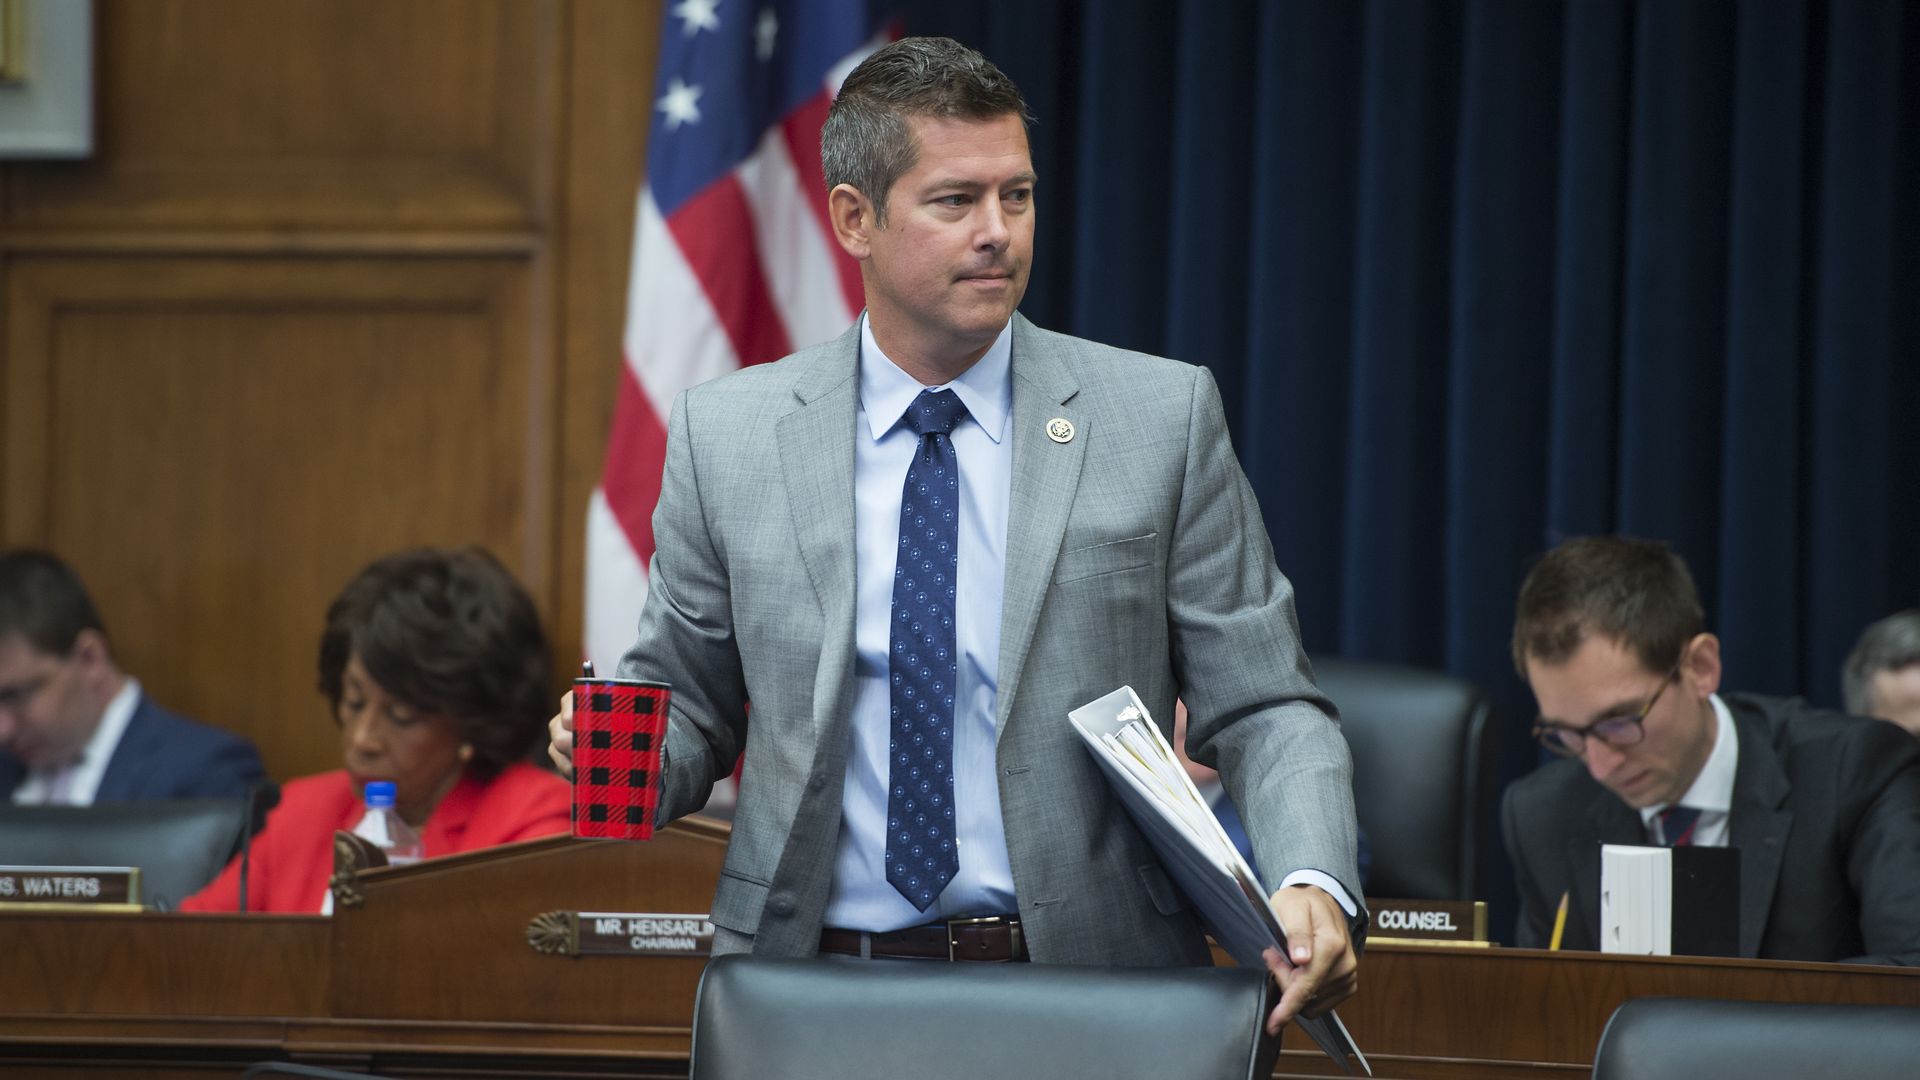 GOP Rep. Sean Duffy resigning to care for child with heart condition - Axios1920 x 1080